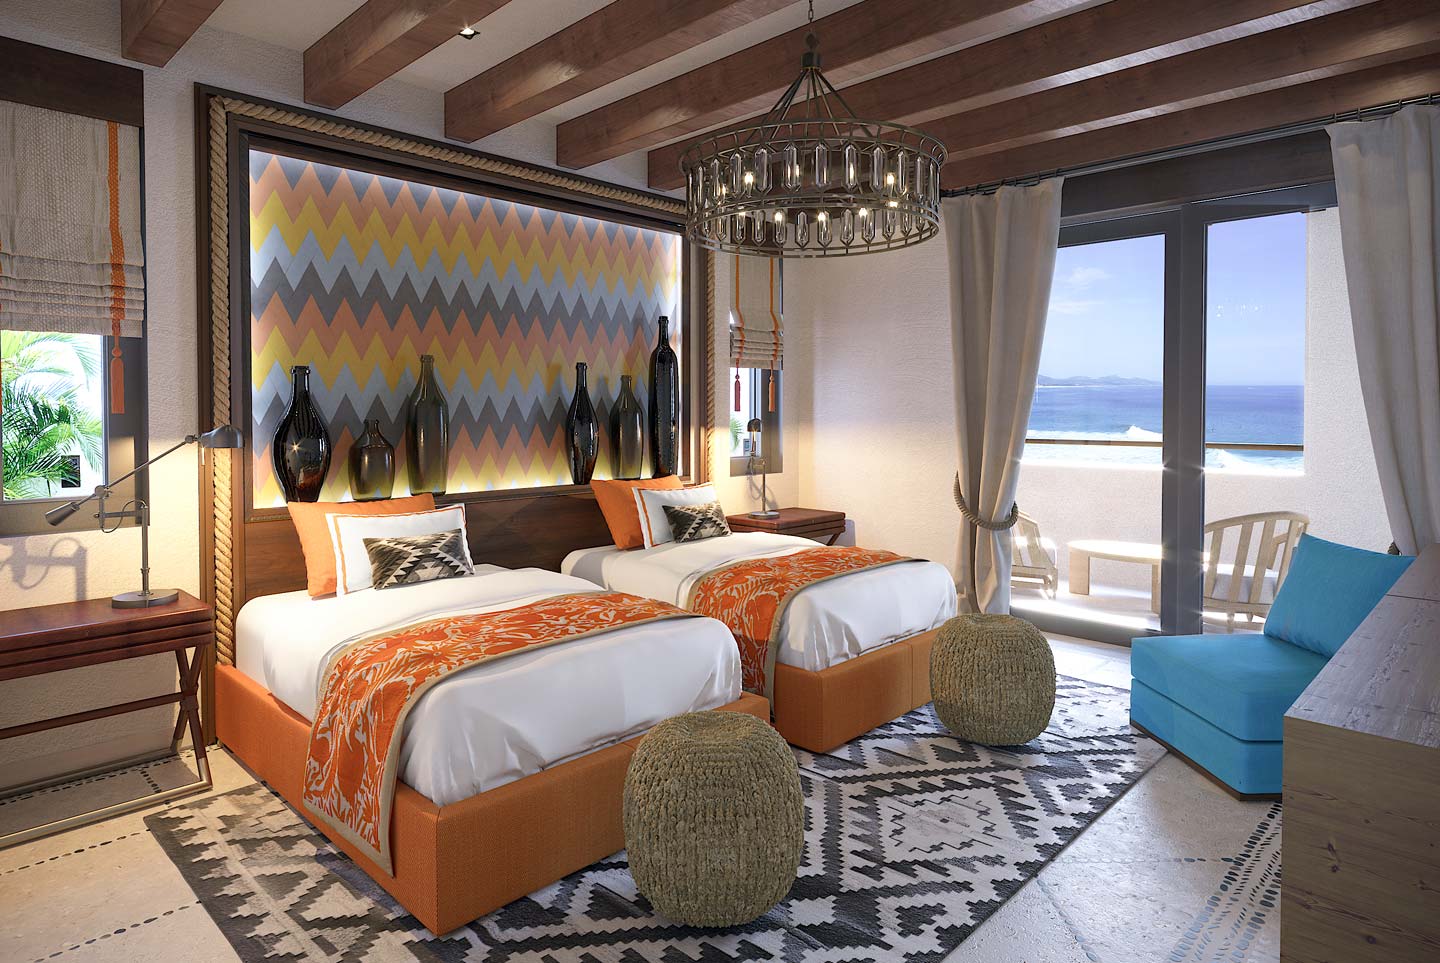 Two side-by-side beds in a bedroom of this Los Cabos beachfront villa, with colorful sheets and beach views.